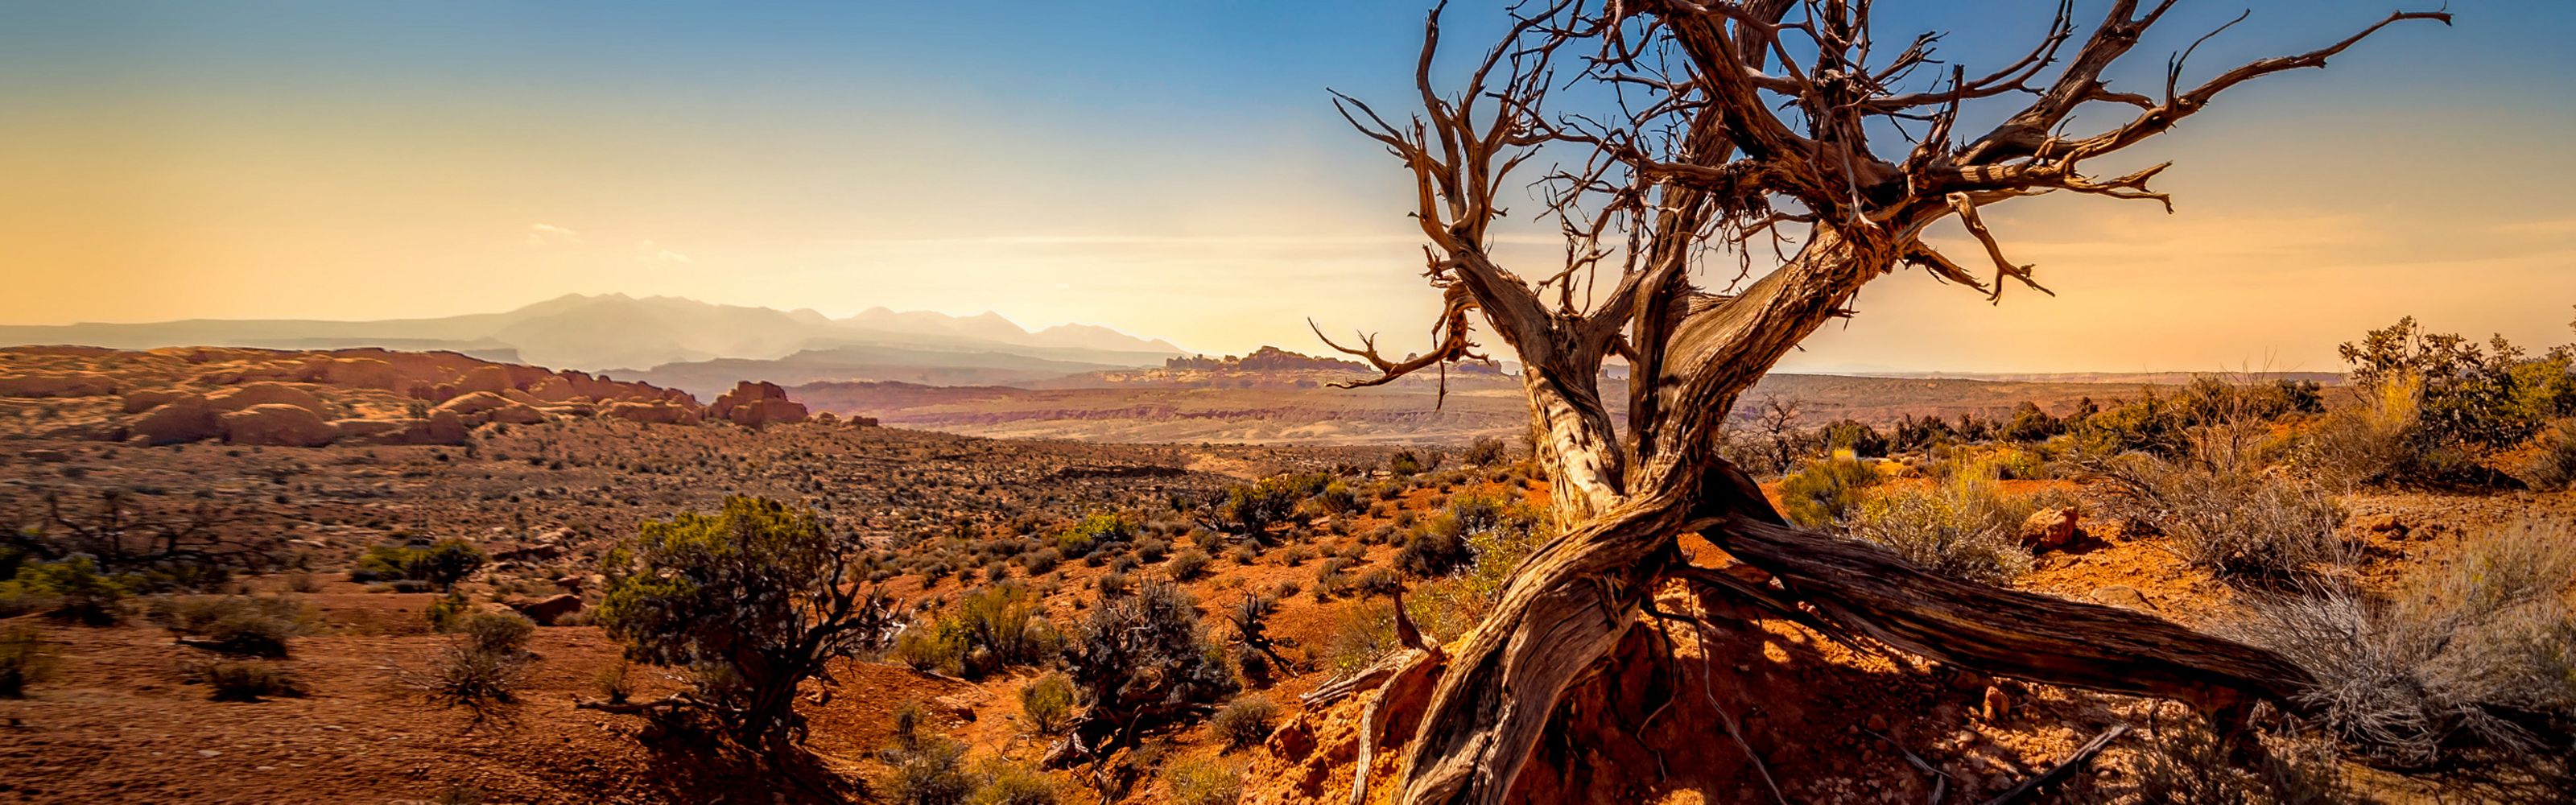 View looking across a vast arid landscape under an orange setting sun; a short dead tree stands in the foreground.